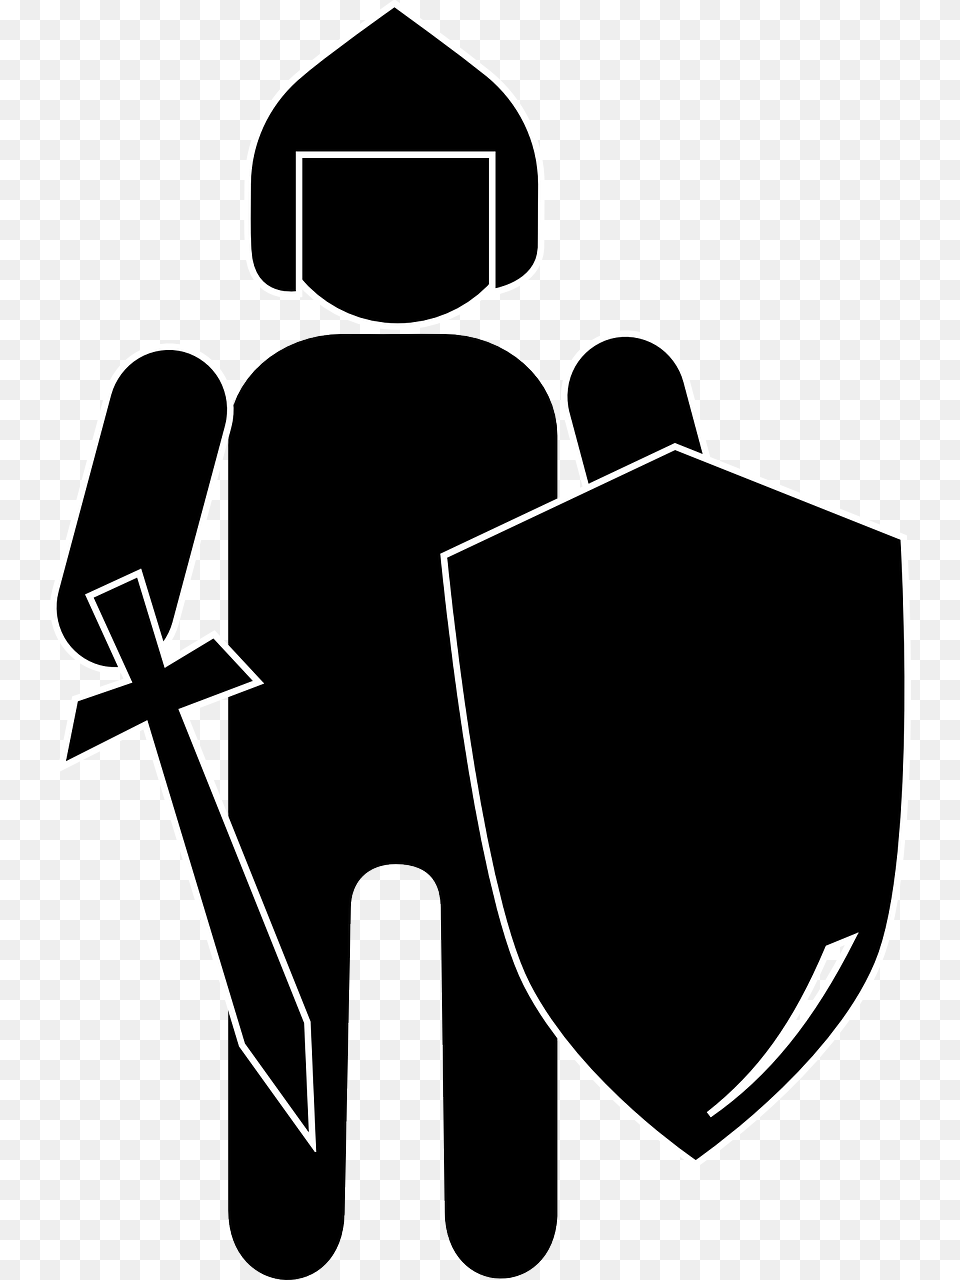 Symbols Of Middle Ages, Stencil, Armor Png Image